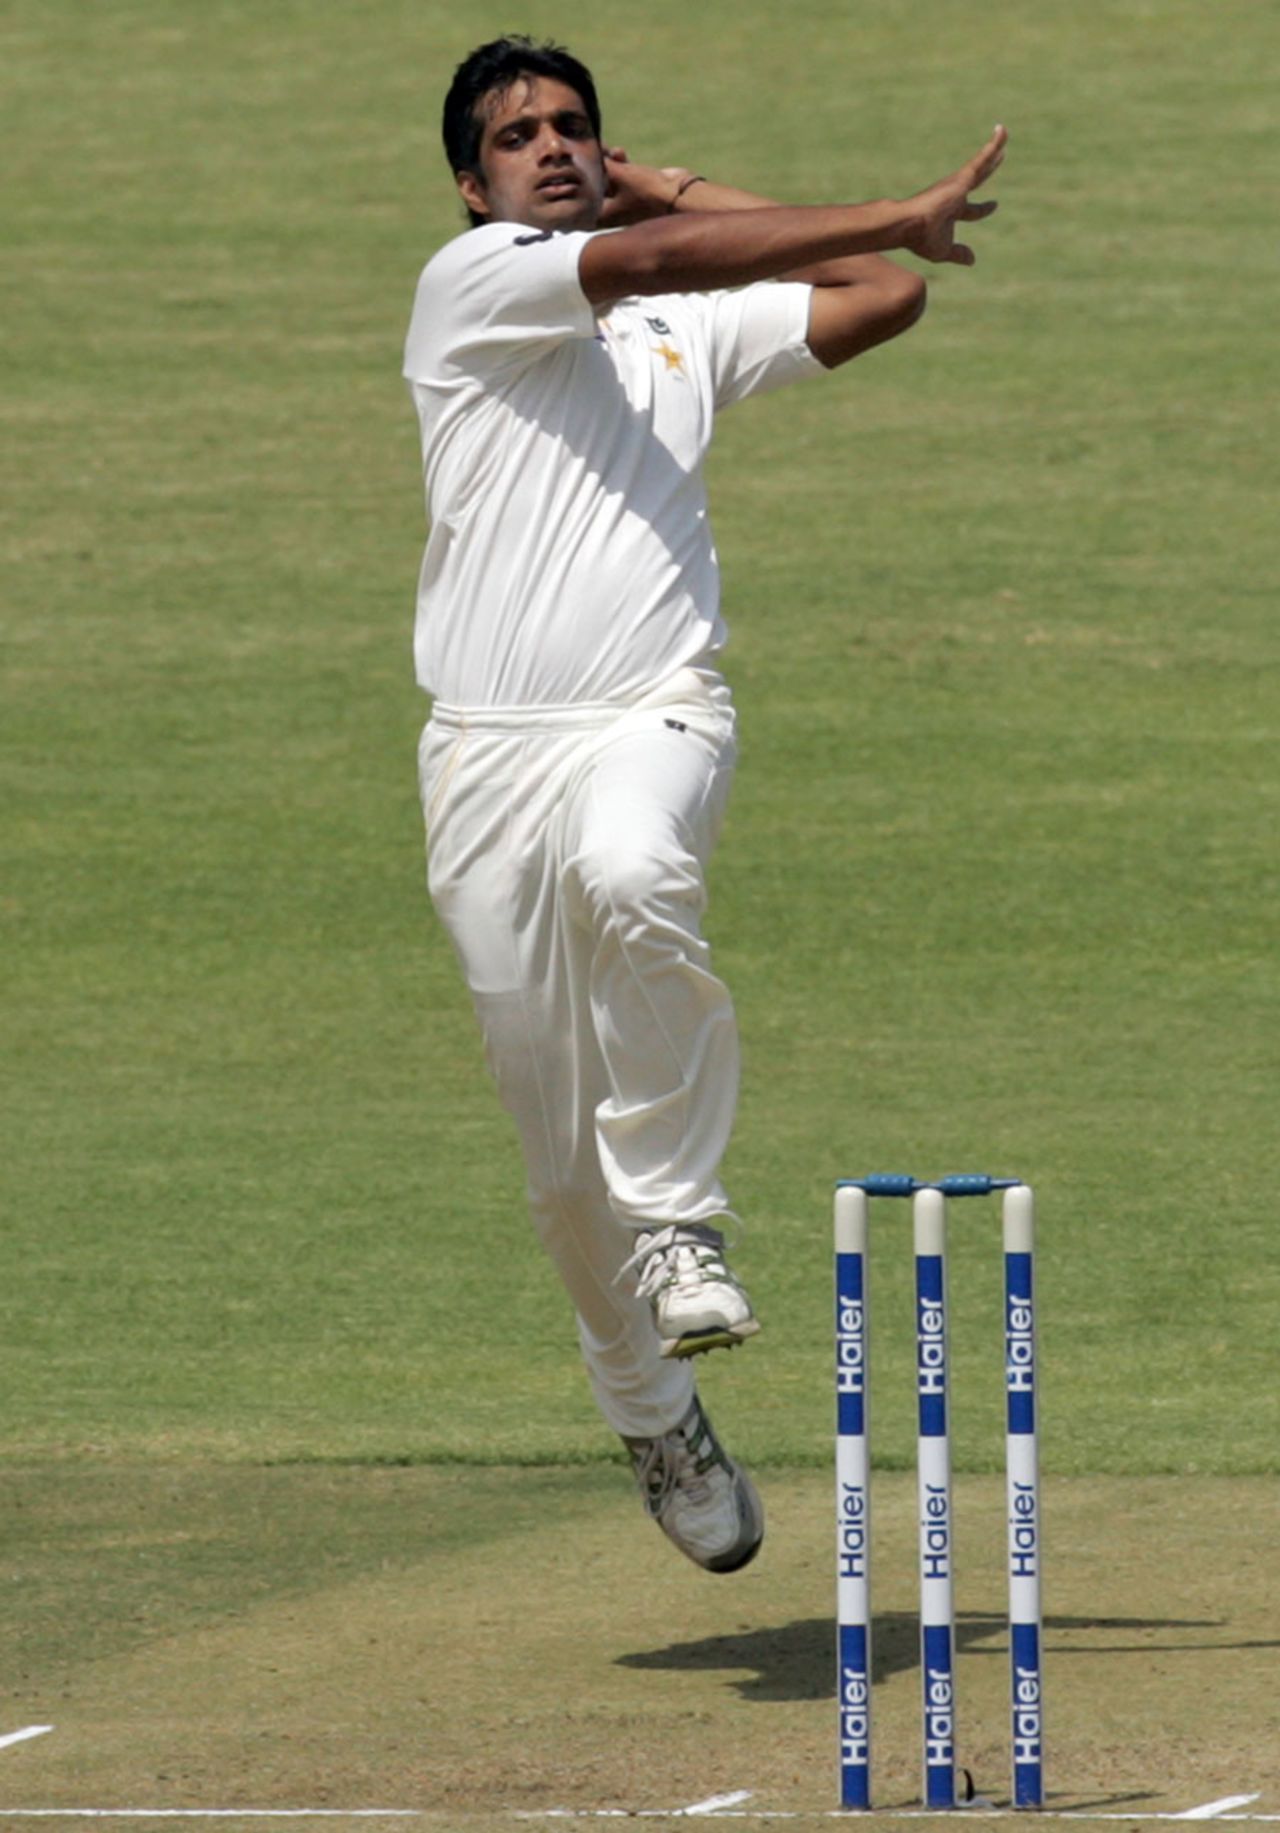 Rahat Ali in his delivery stride, Zimbabwe v Pakistan, 1st Test, Harare, 2nd day, September 4, 2013